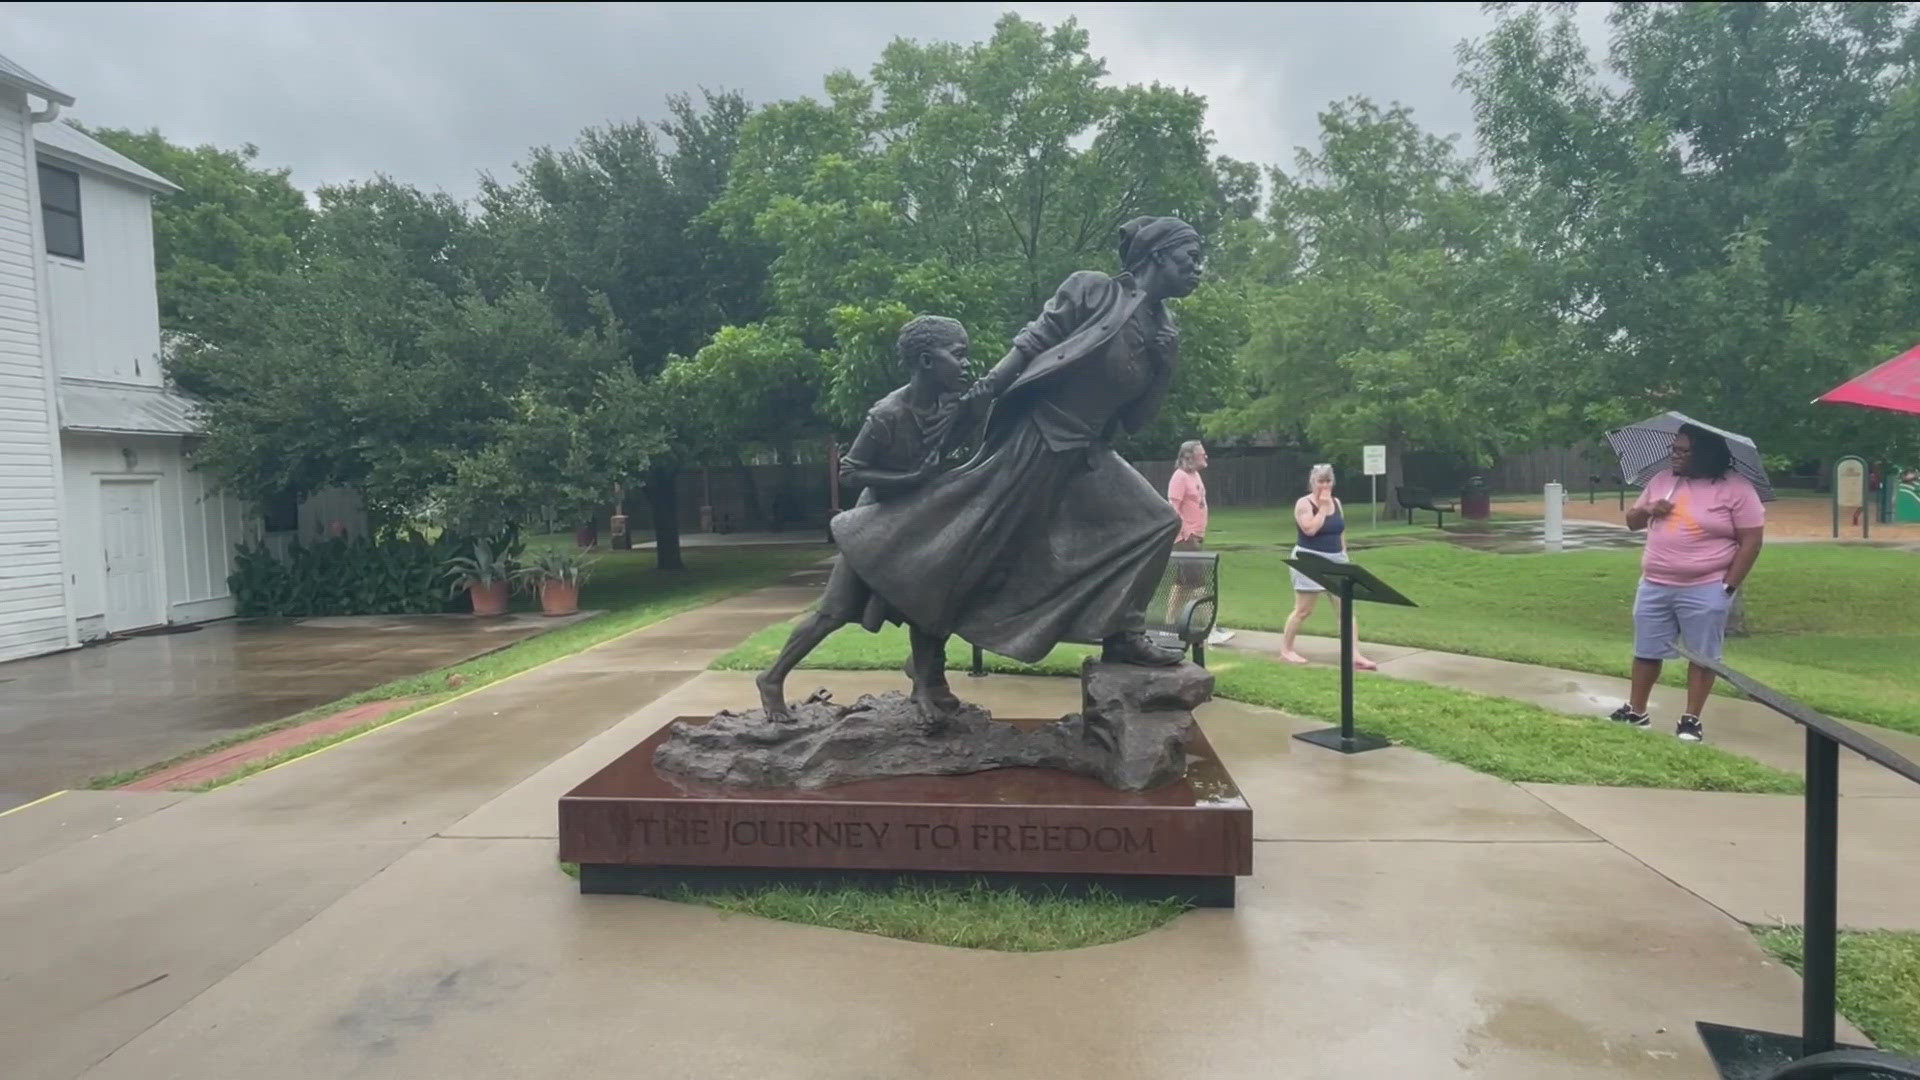 To celebrate Juneteenth in Bastrop, a 9-foot monument of Harriet Tubman is on display for the next three months. KVUE was there for the welcome ceremony.